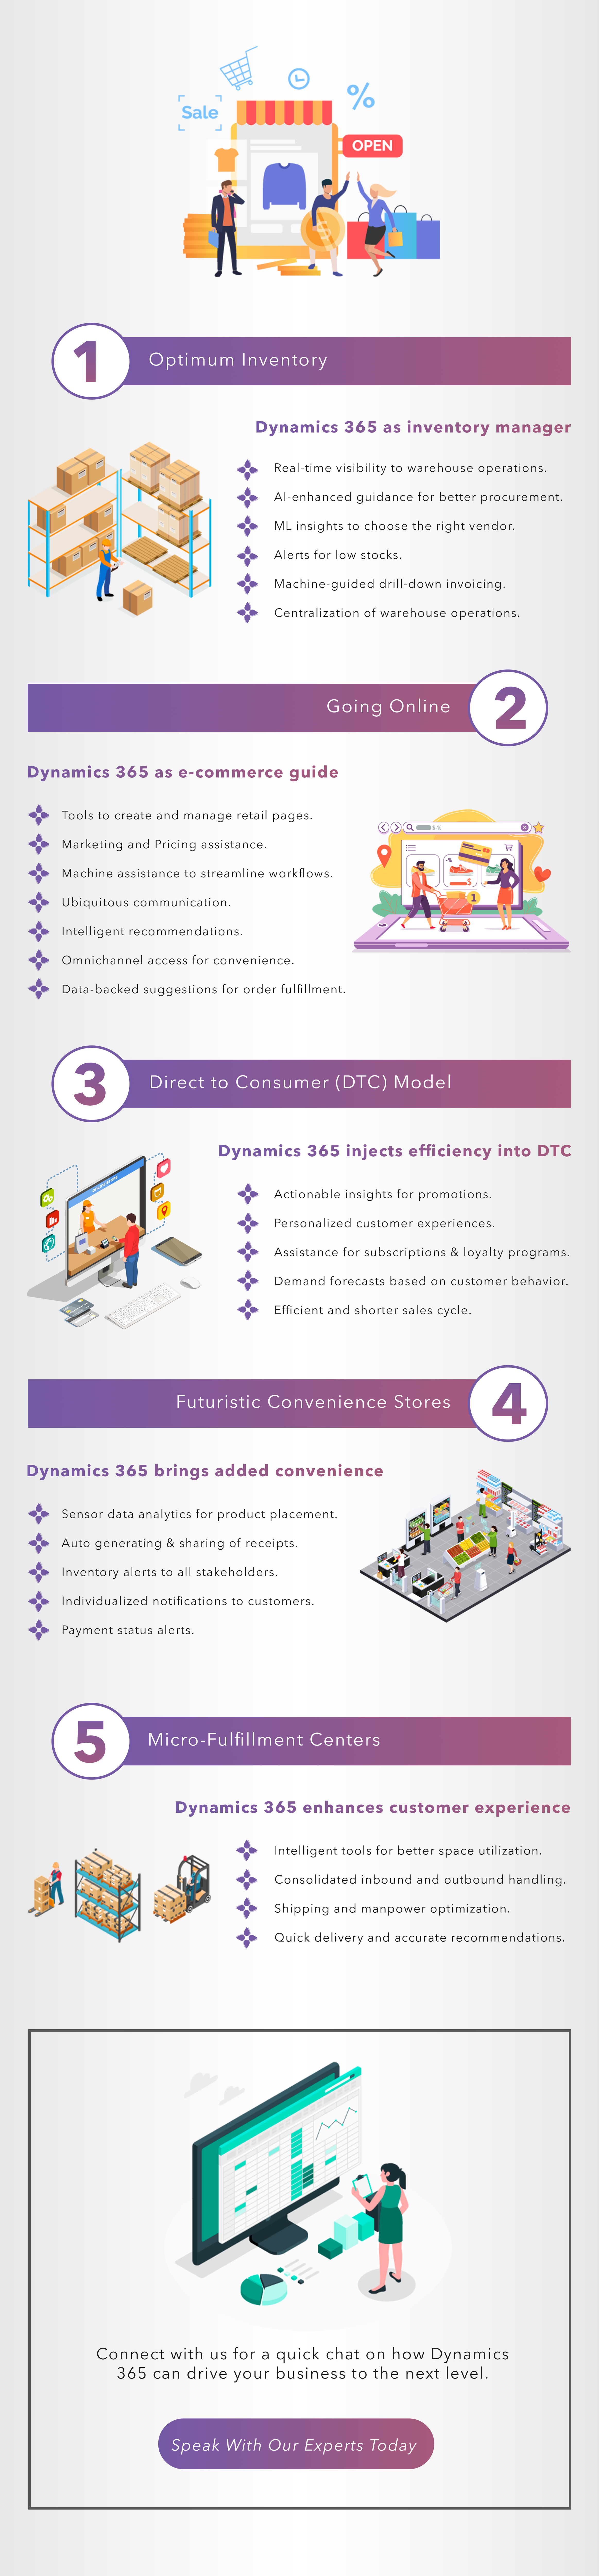 Embracing 2020 retail trends with Dynamics 365